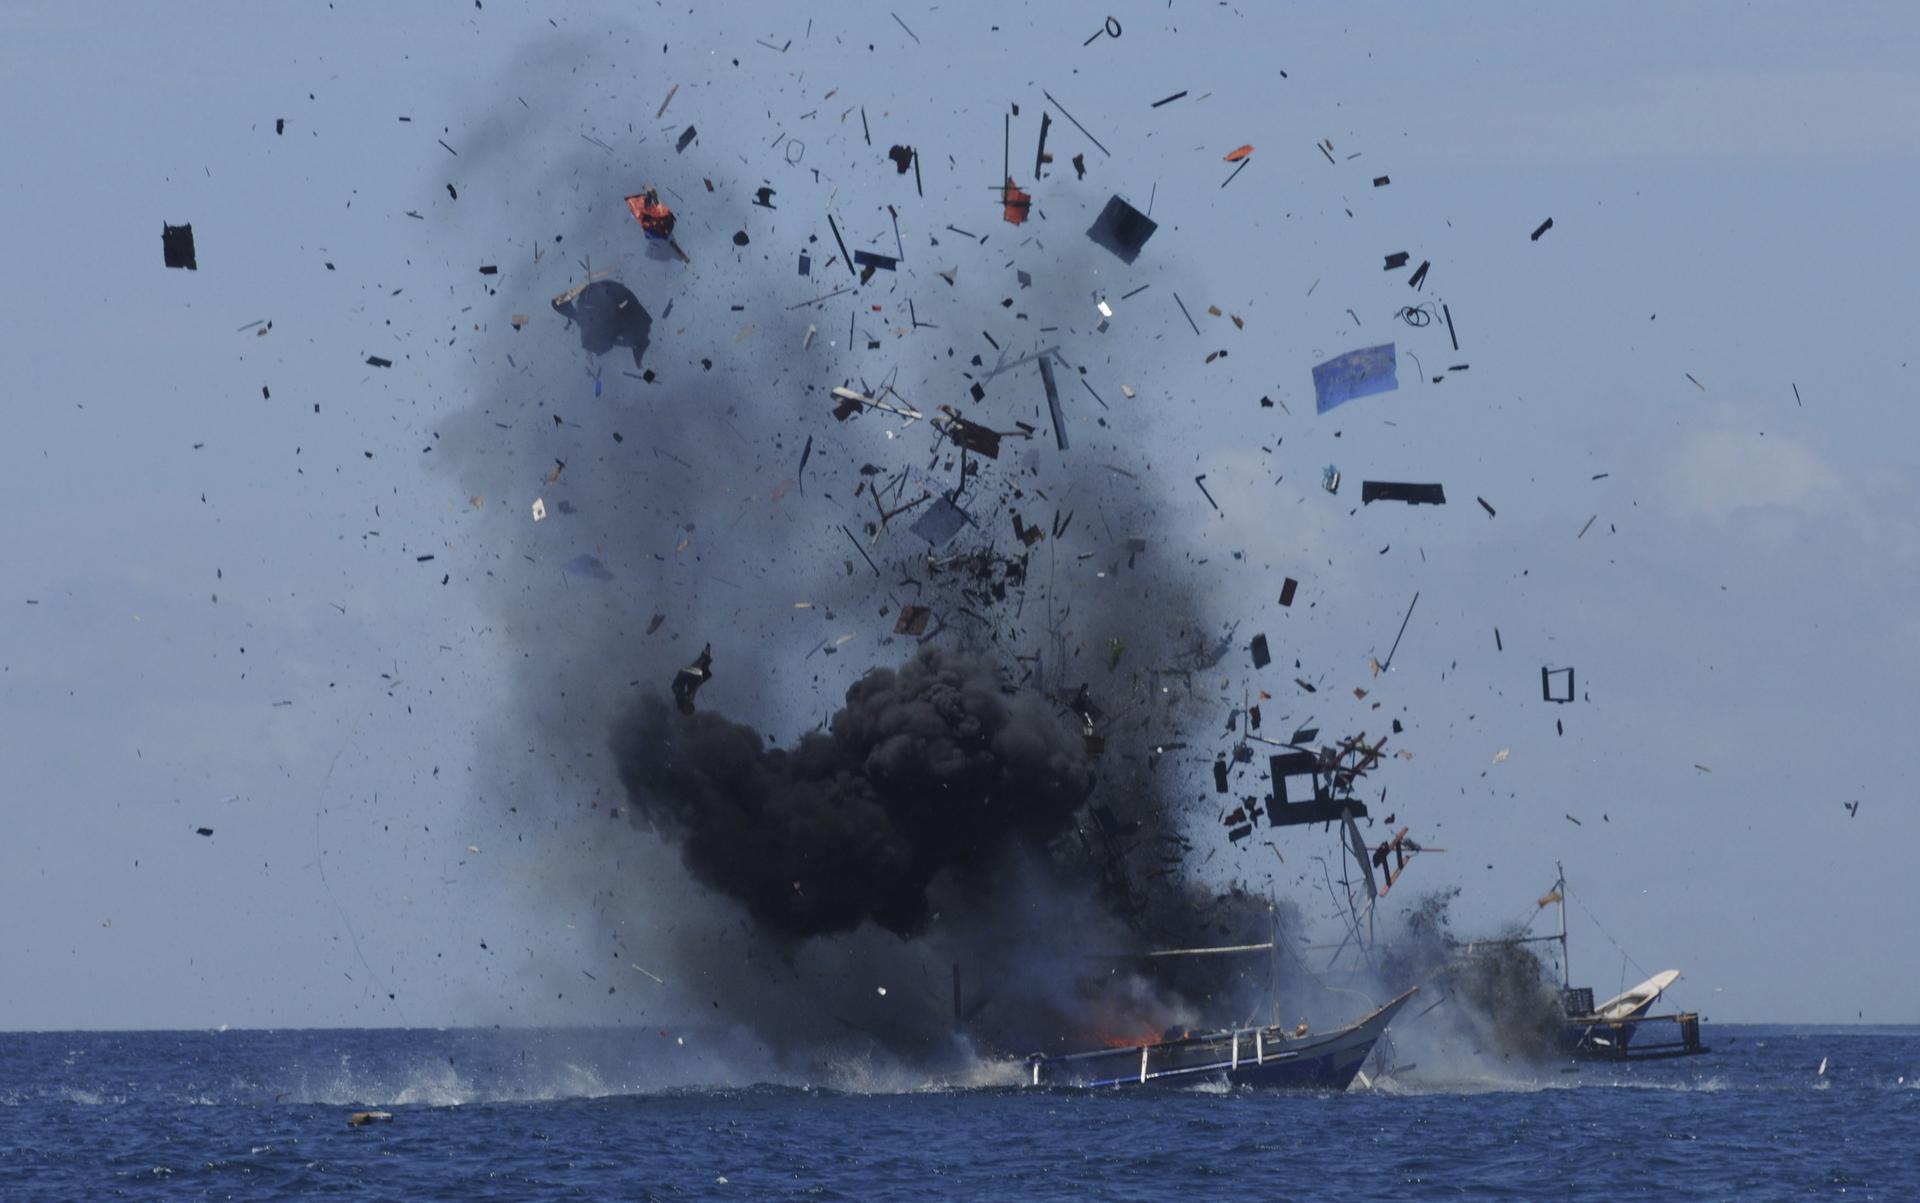 Indonesia exploding boats